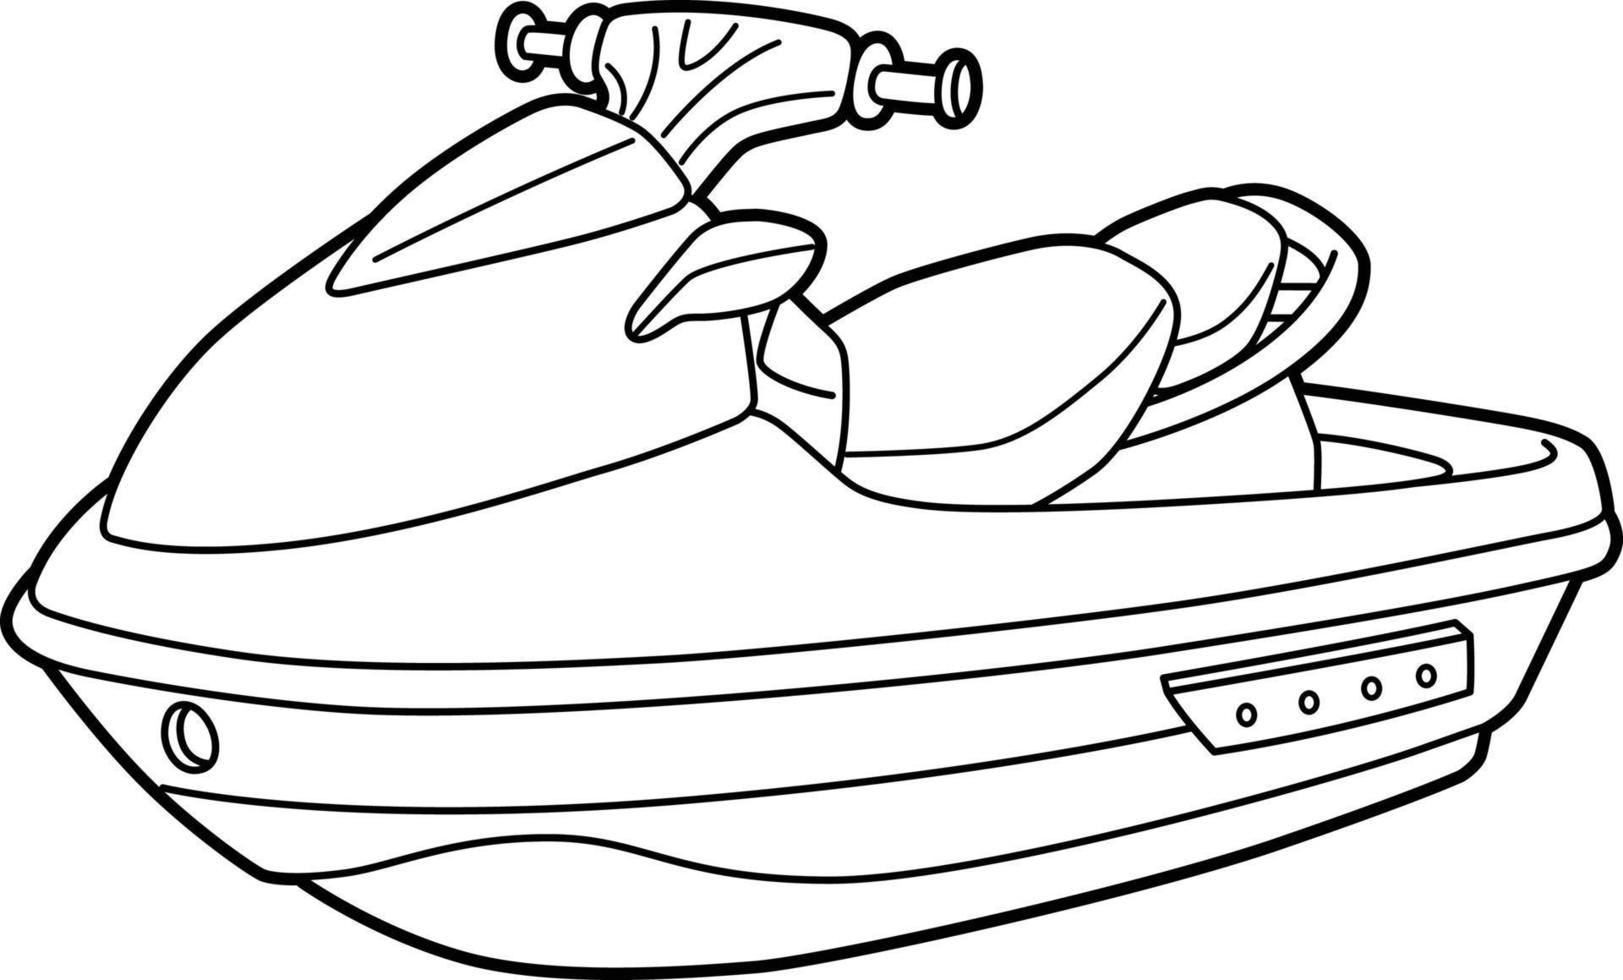 Jet Ski Vehicle Coloring Page for Kids vector